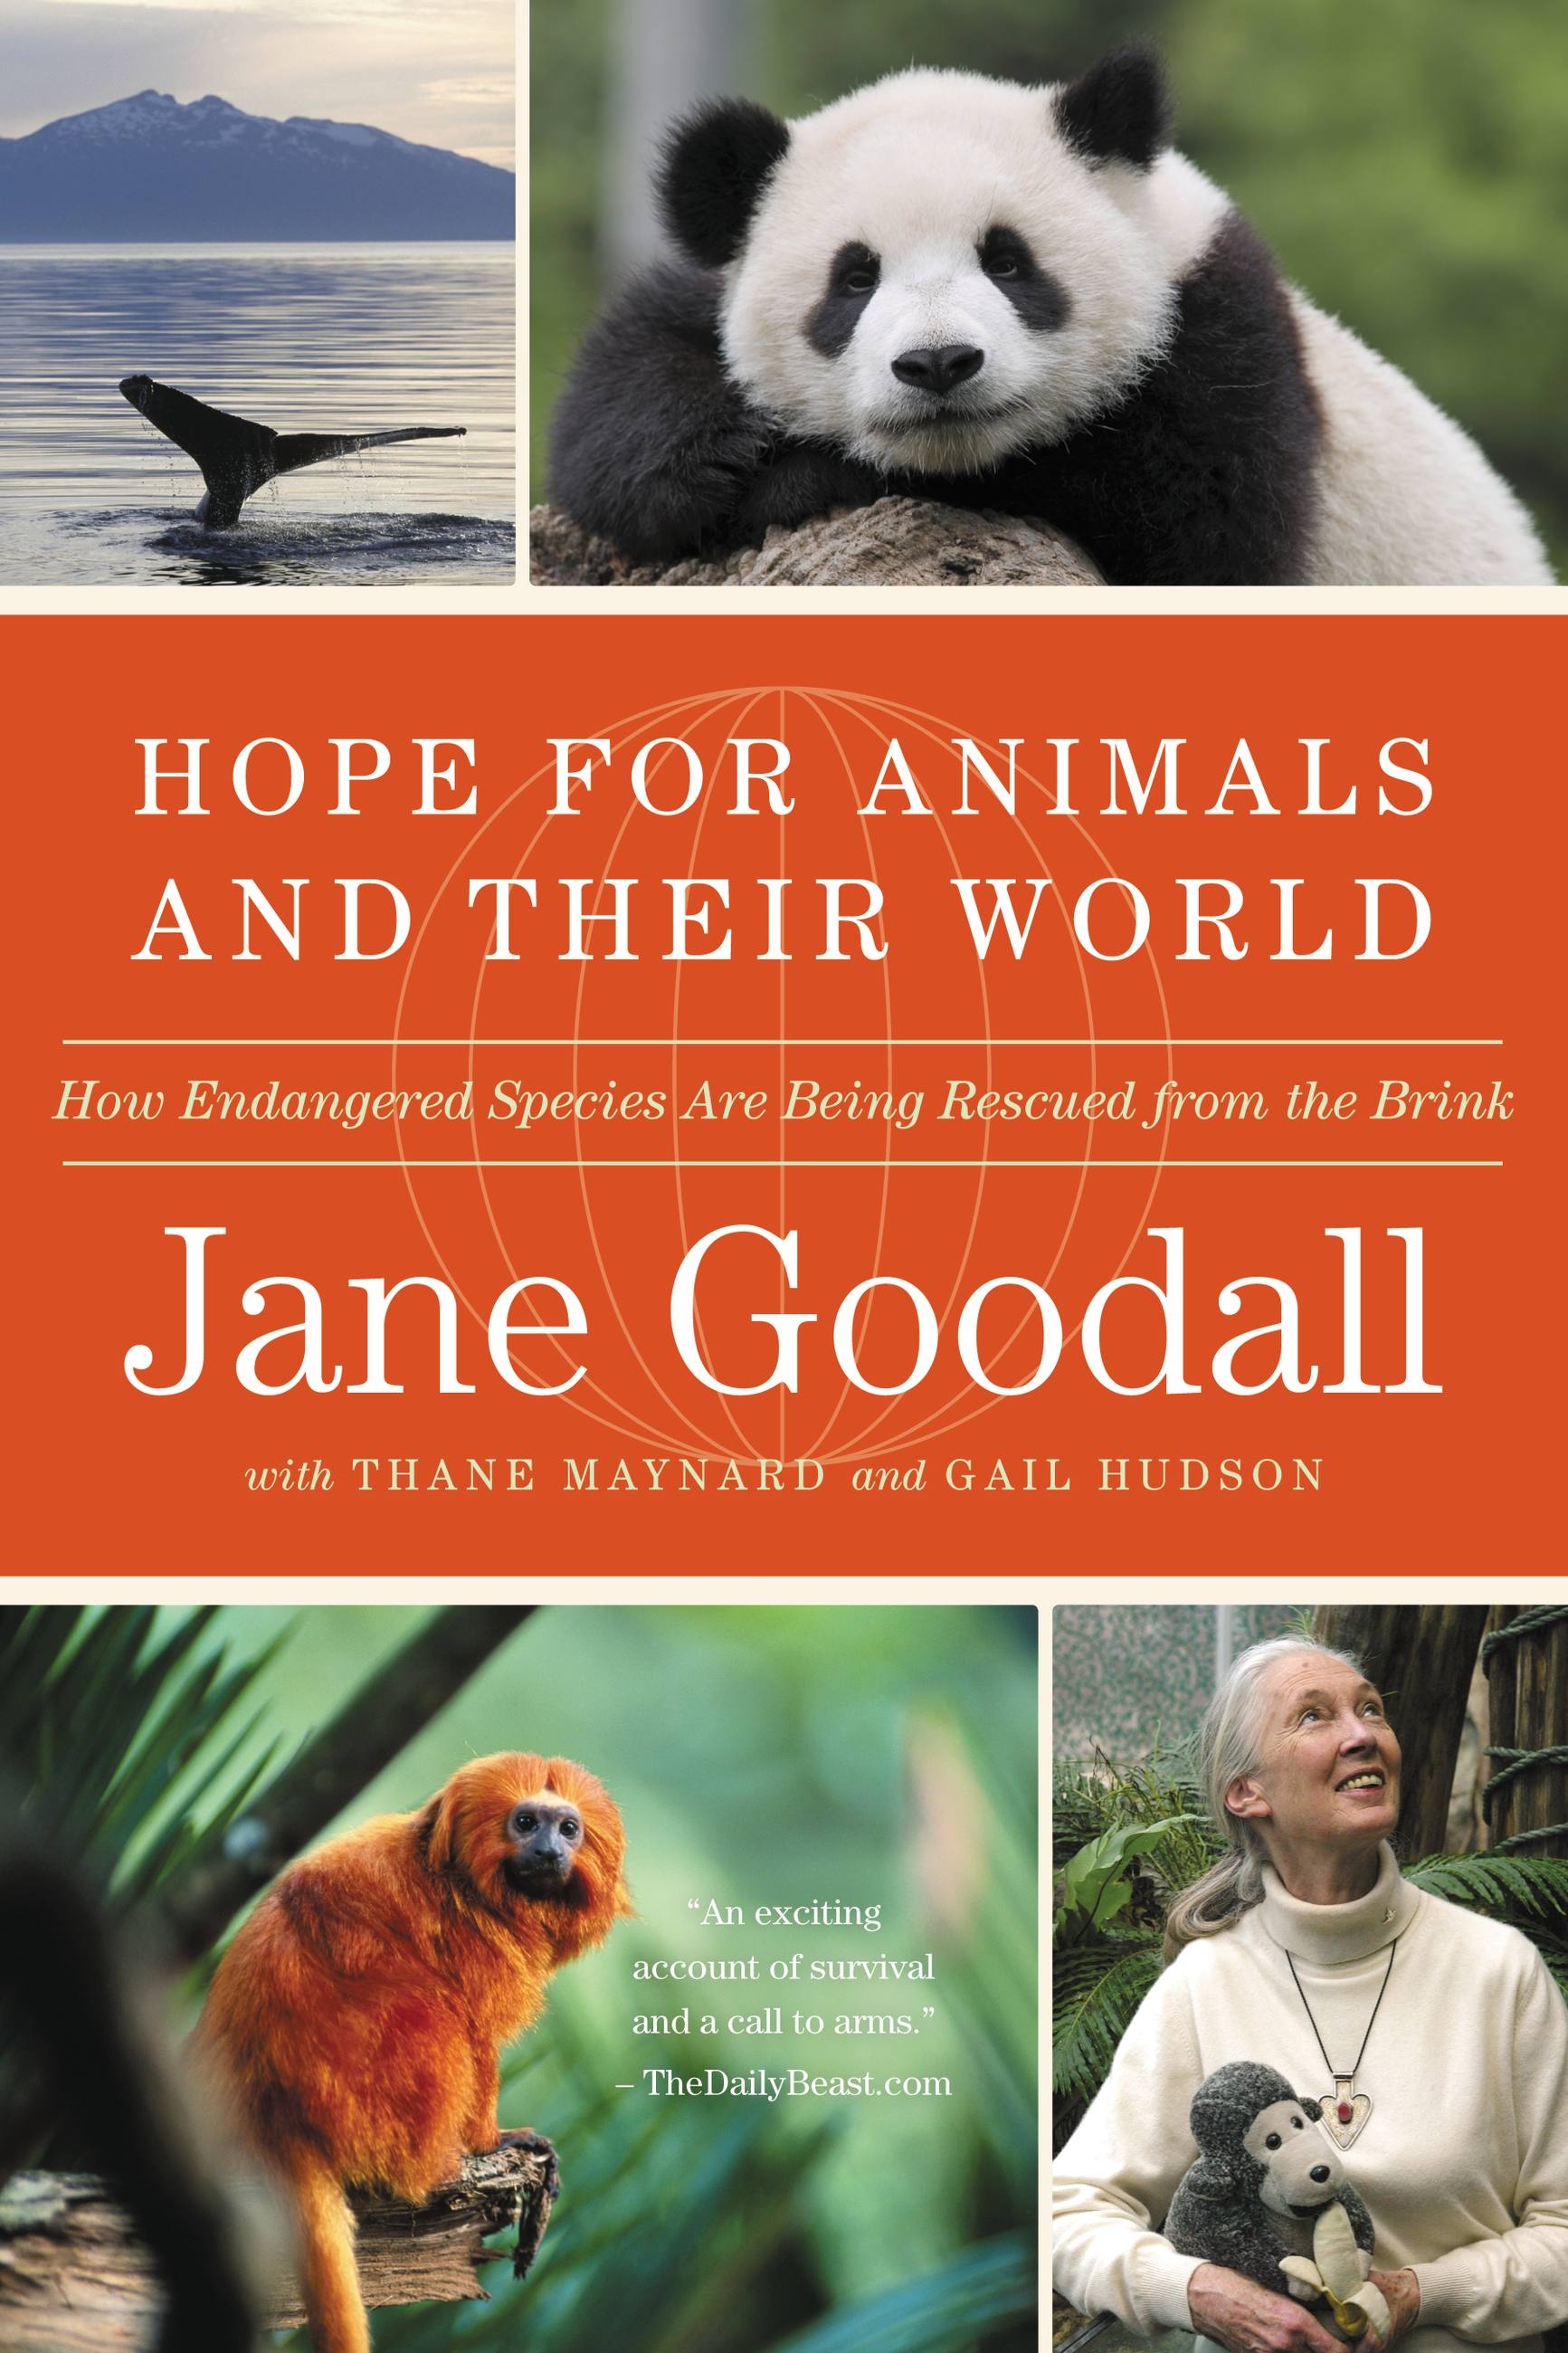 Hope for Animals and Their World by Jane Goodall | Grand Central Publishing